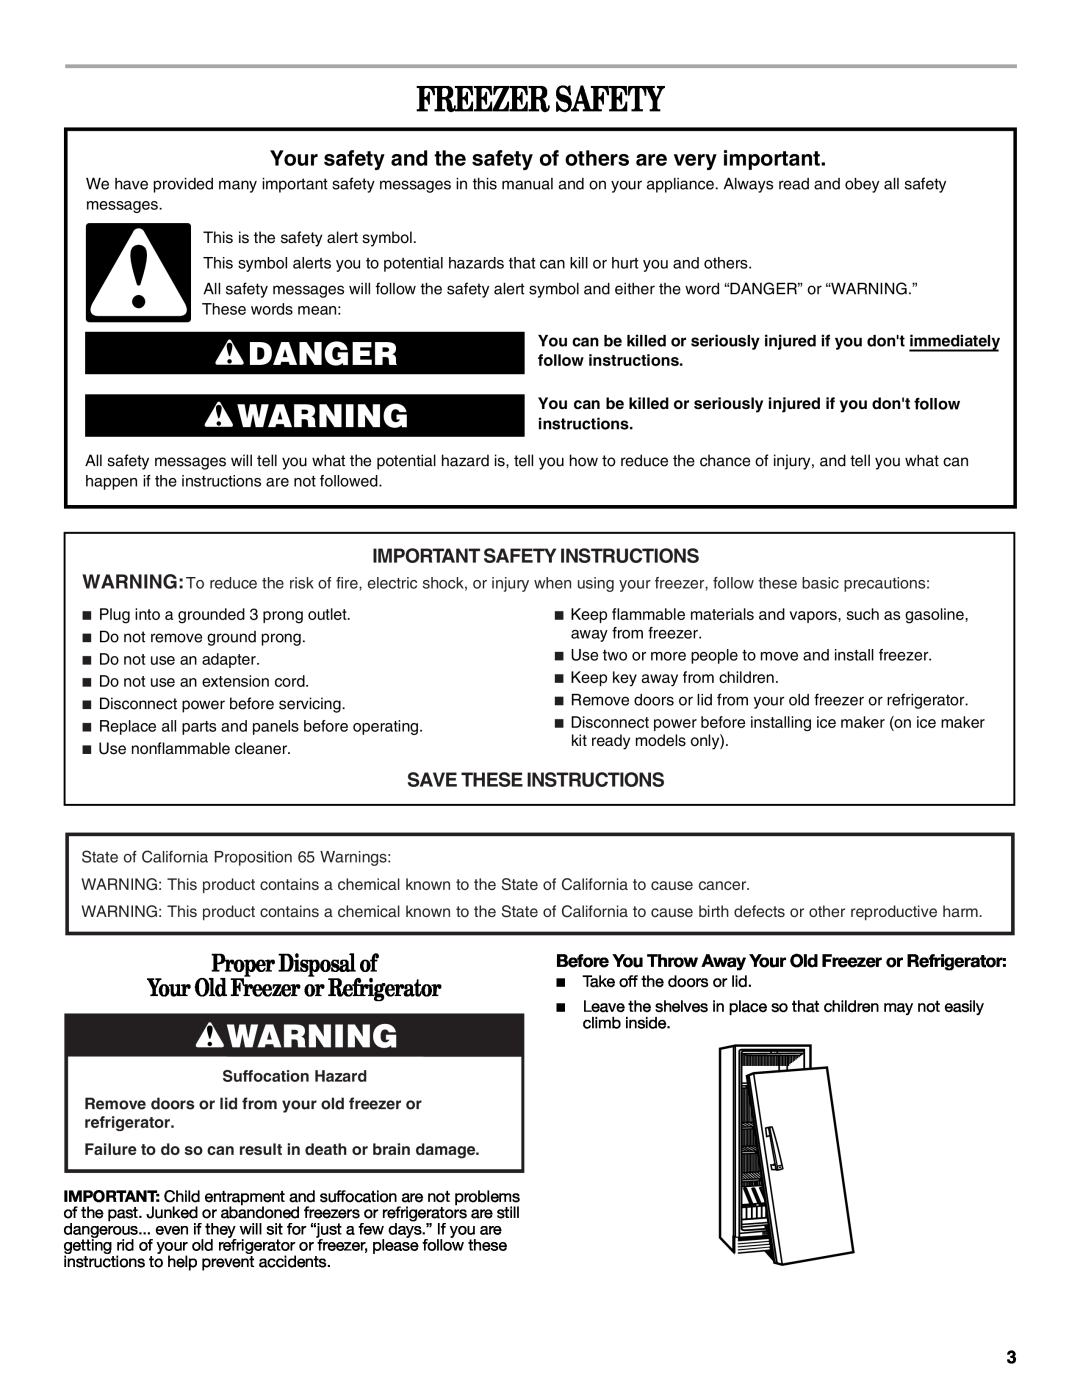 Whirlpool W10326801A Freezer Safety, Danger, Proper Disposal of Your Old Freezer or Refrigerator, Save These Instructions 